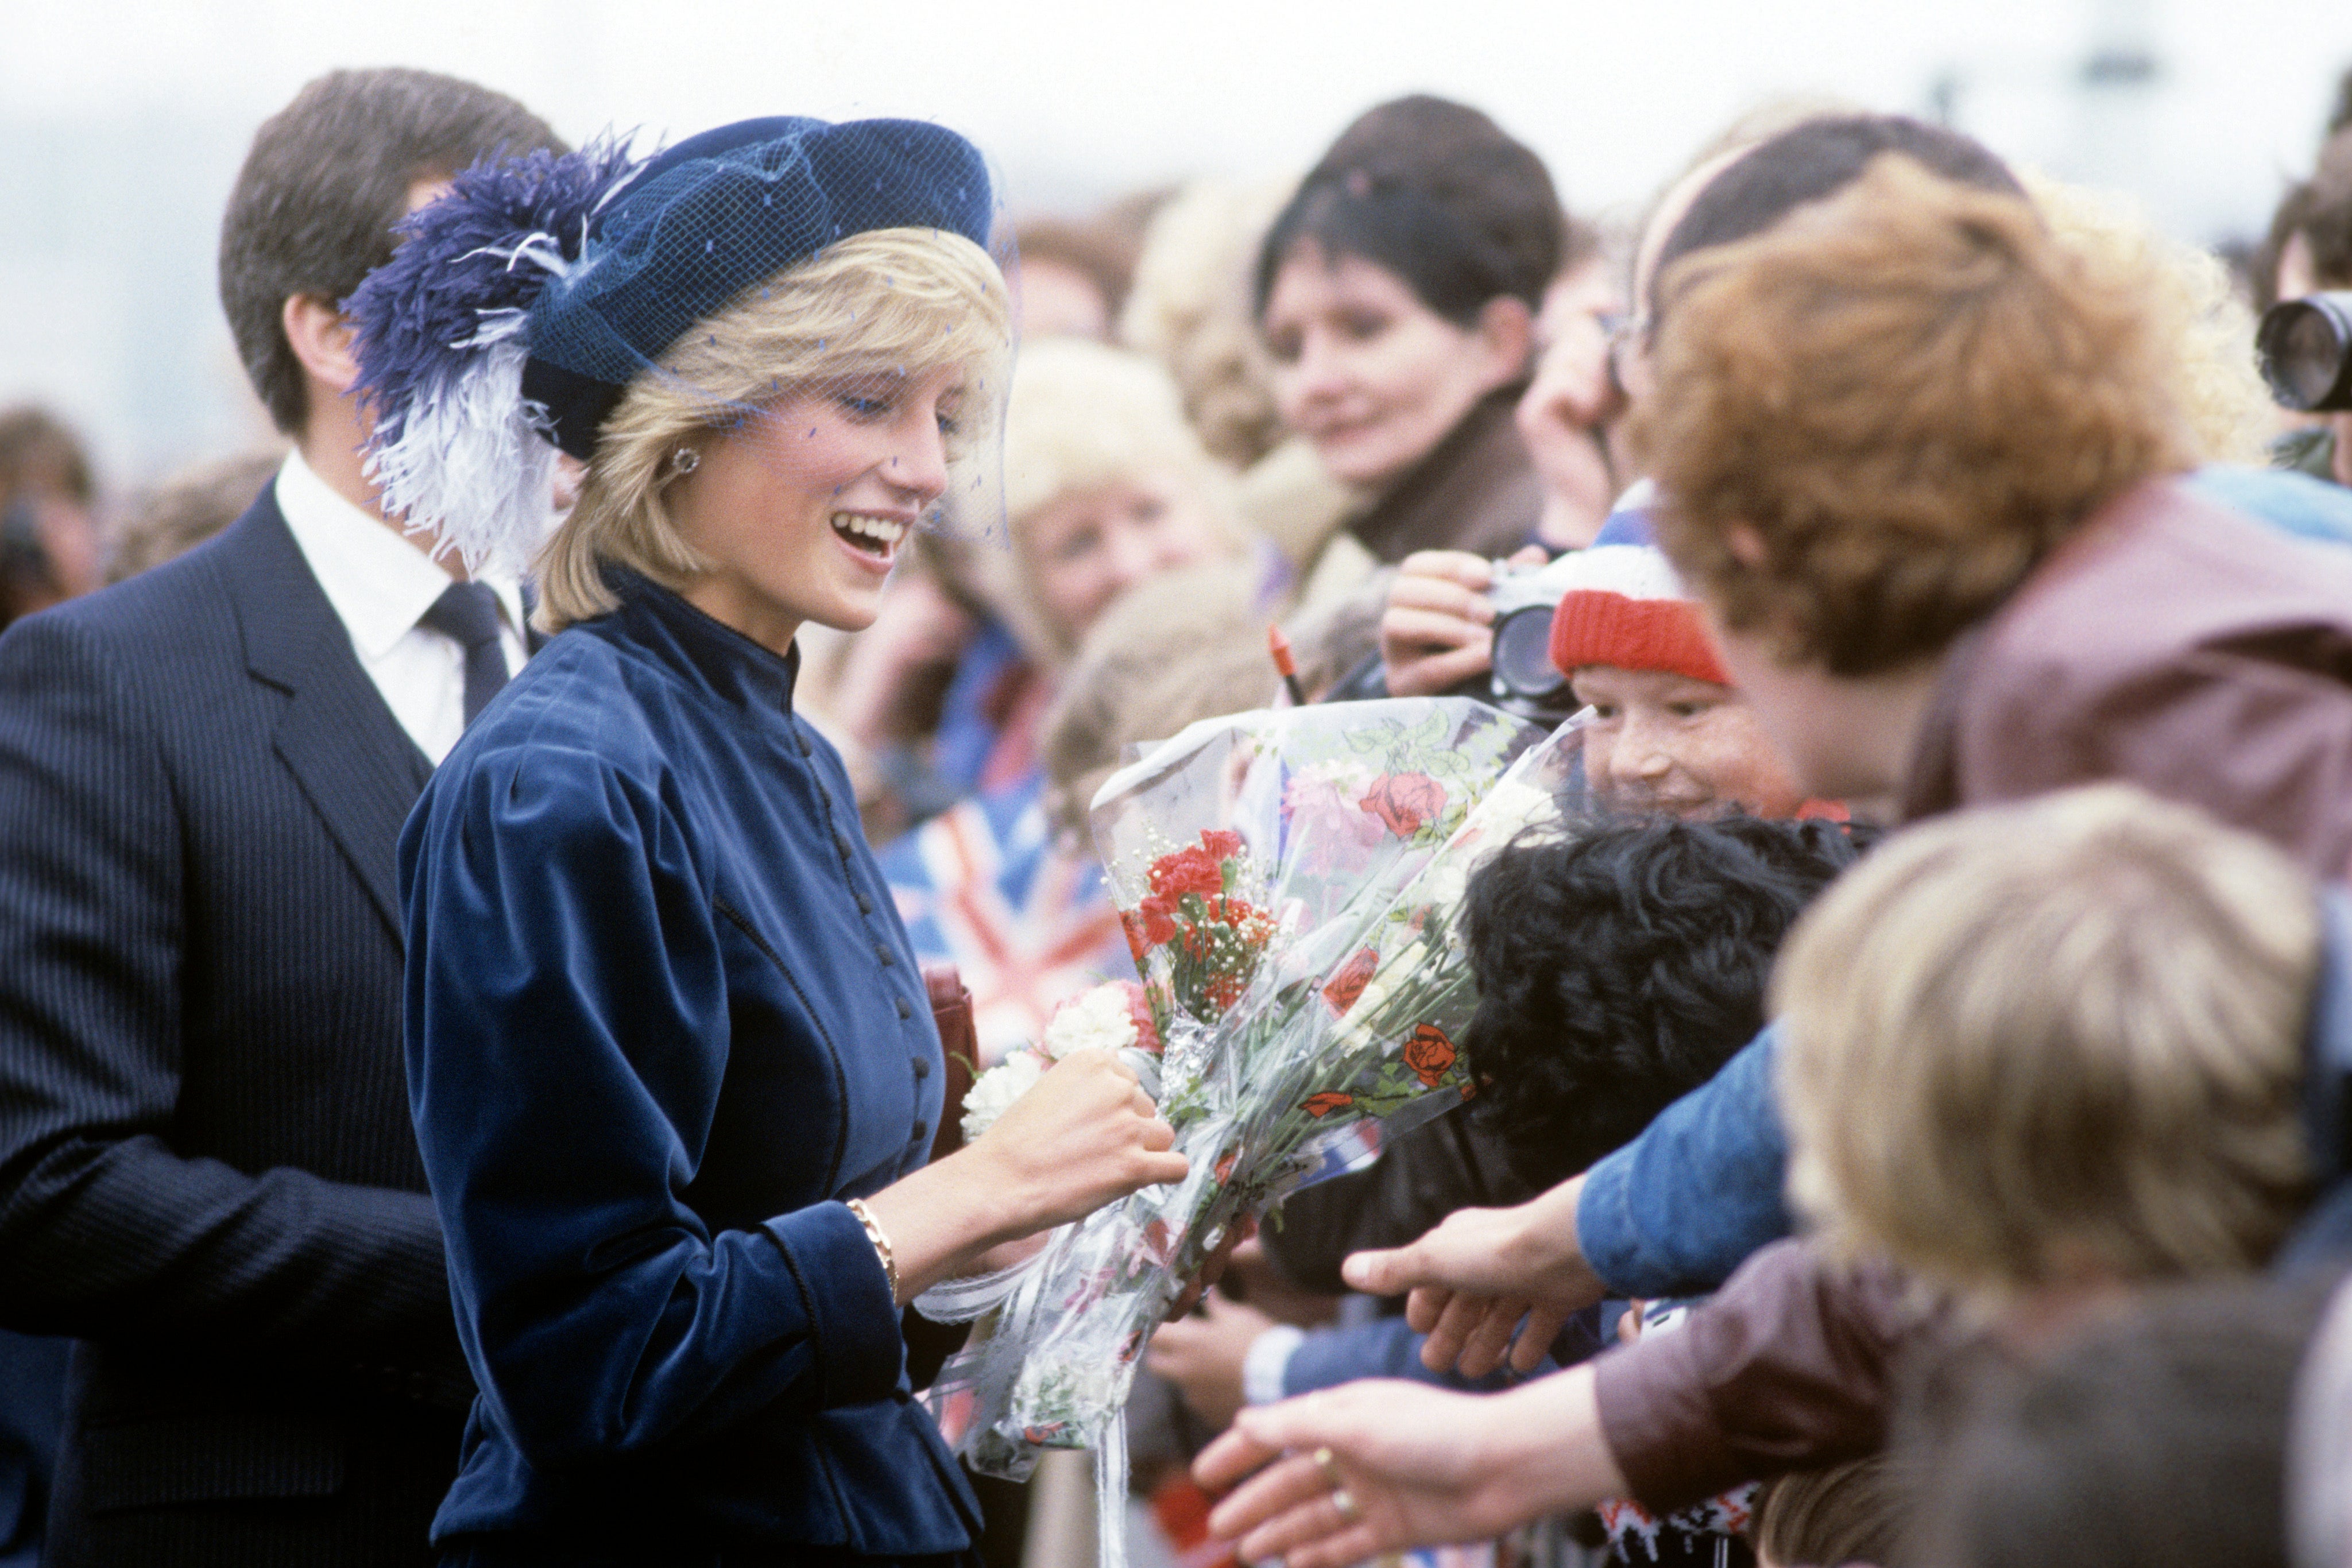 The Princess of Wales meets the crowds during a walkabout on the new Redheugh Bridge over the River Tyne in 1983 (Ron Bell/PA)